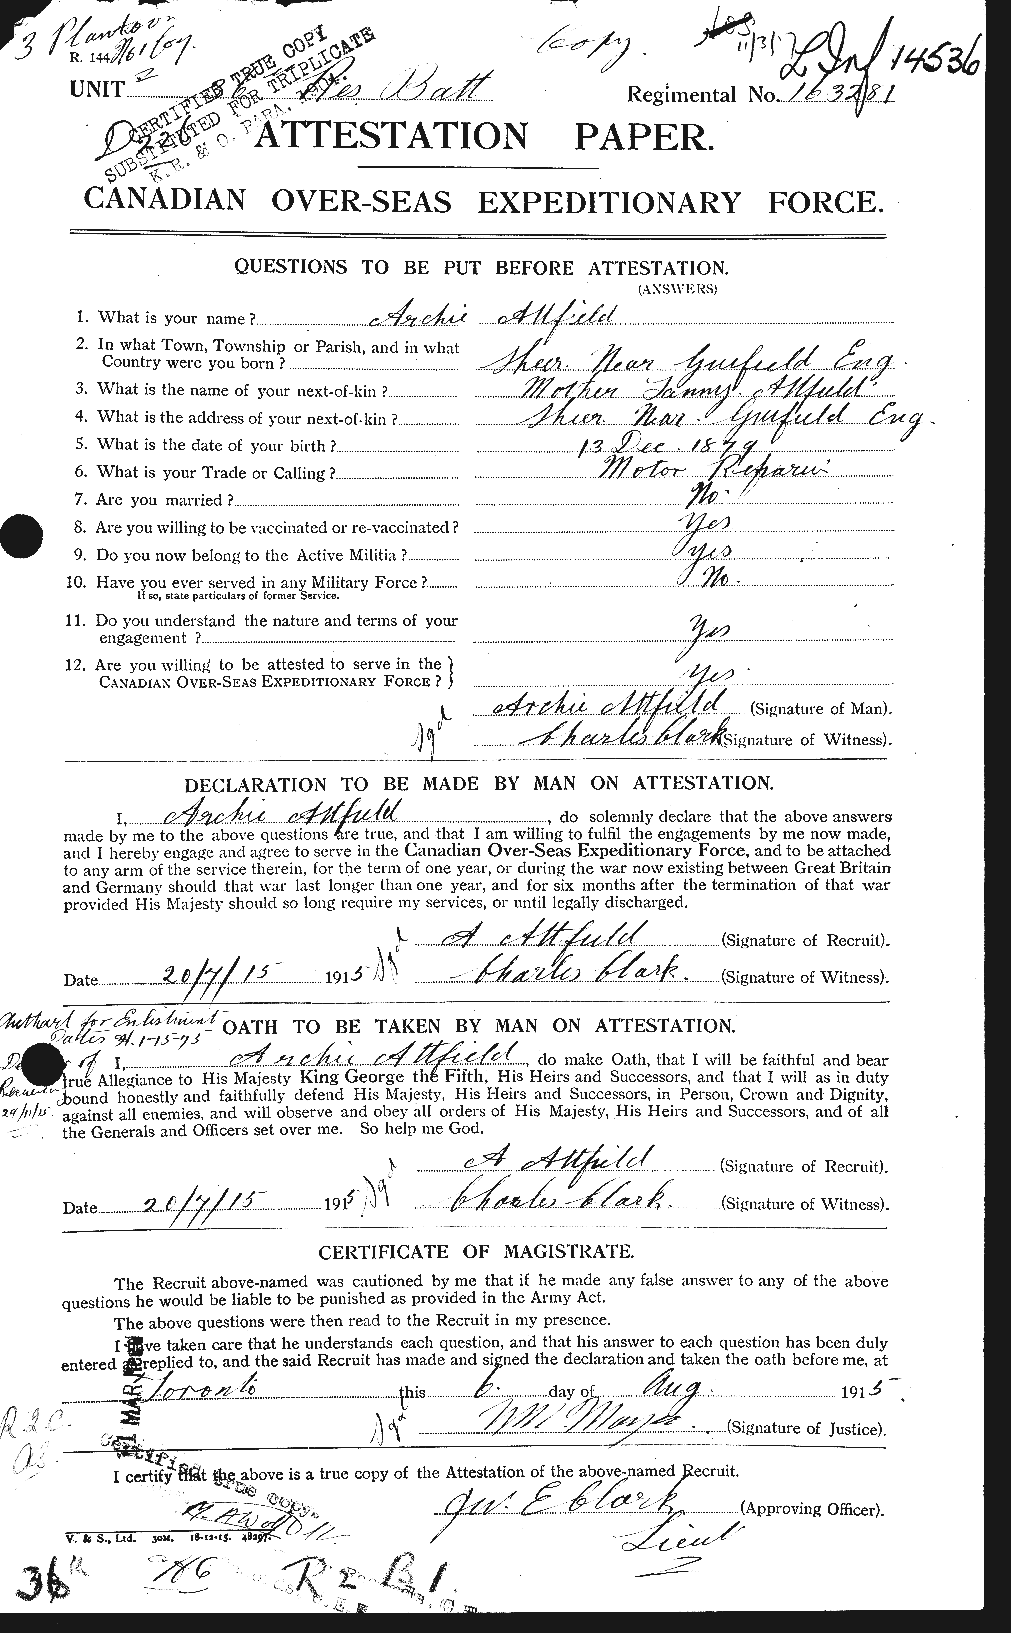 Personnel Records of the First World War - CEF 224113a